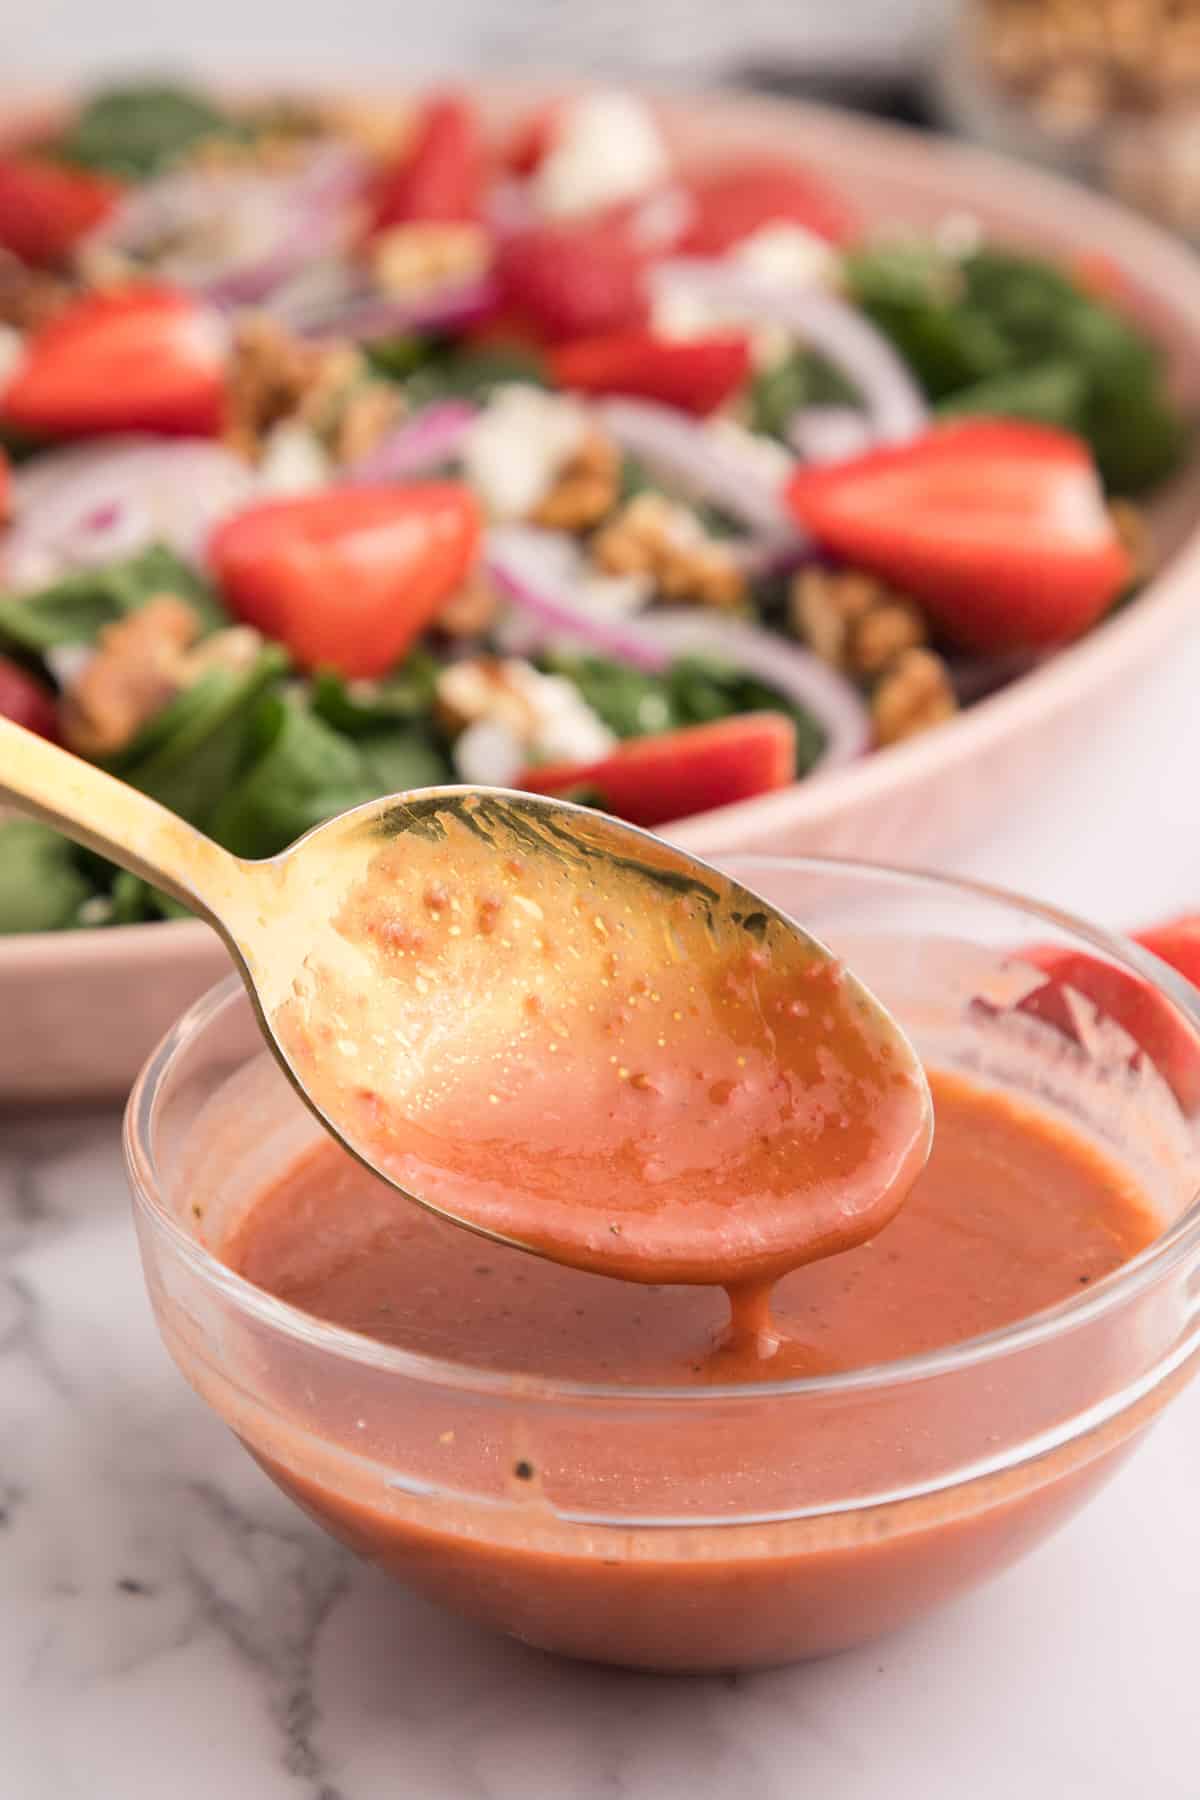 Strawberry balsamic vinaigrette in a glass bowl with a gold spoon lifting some up.